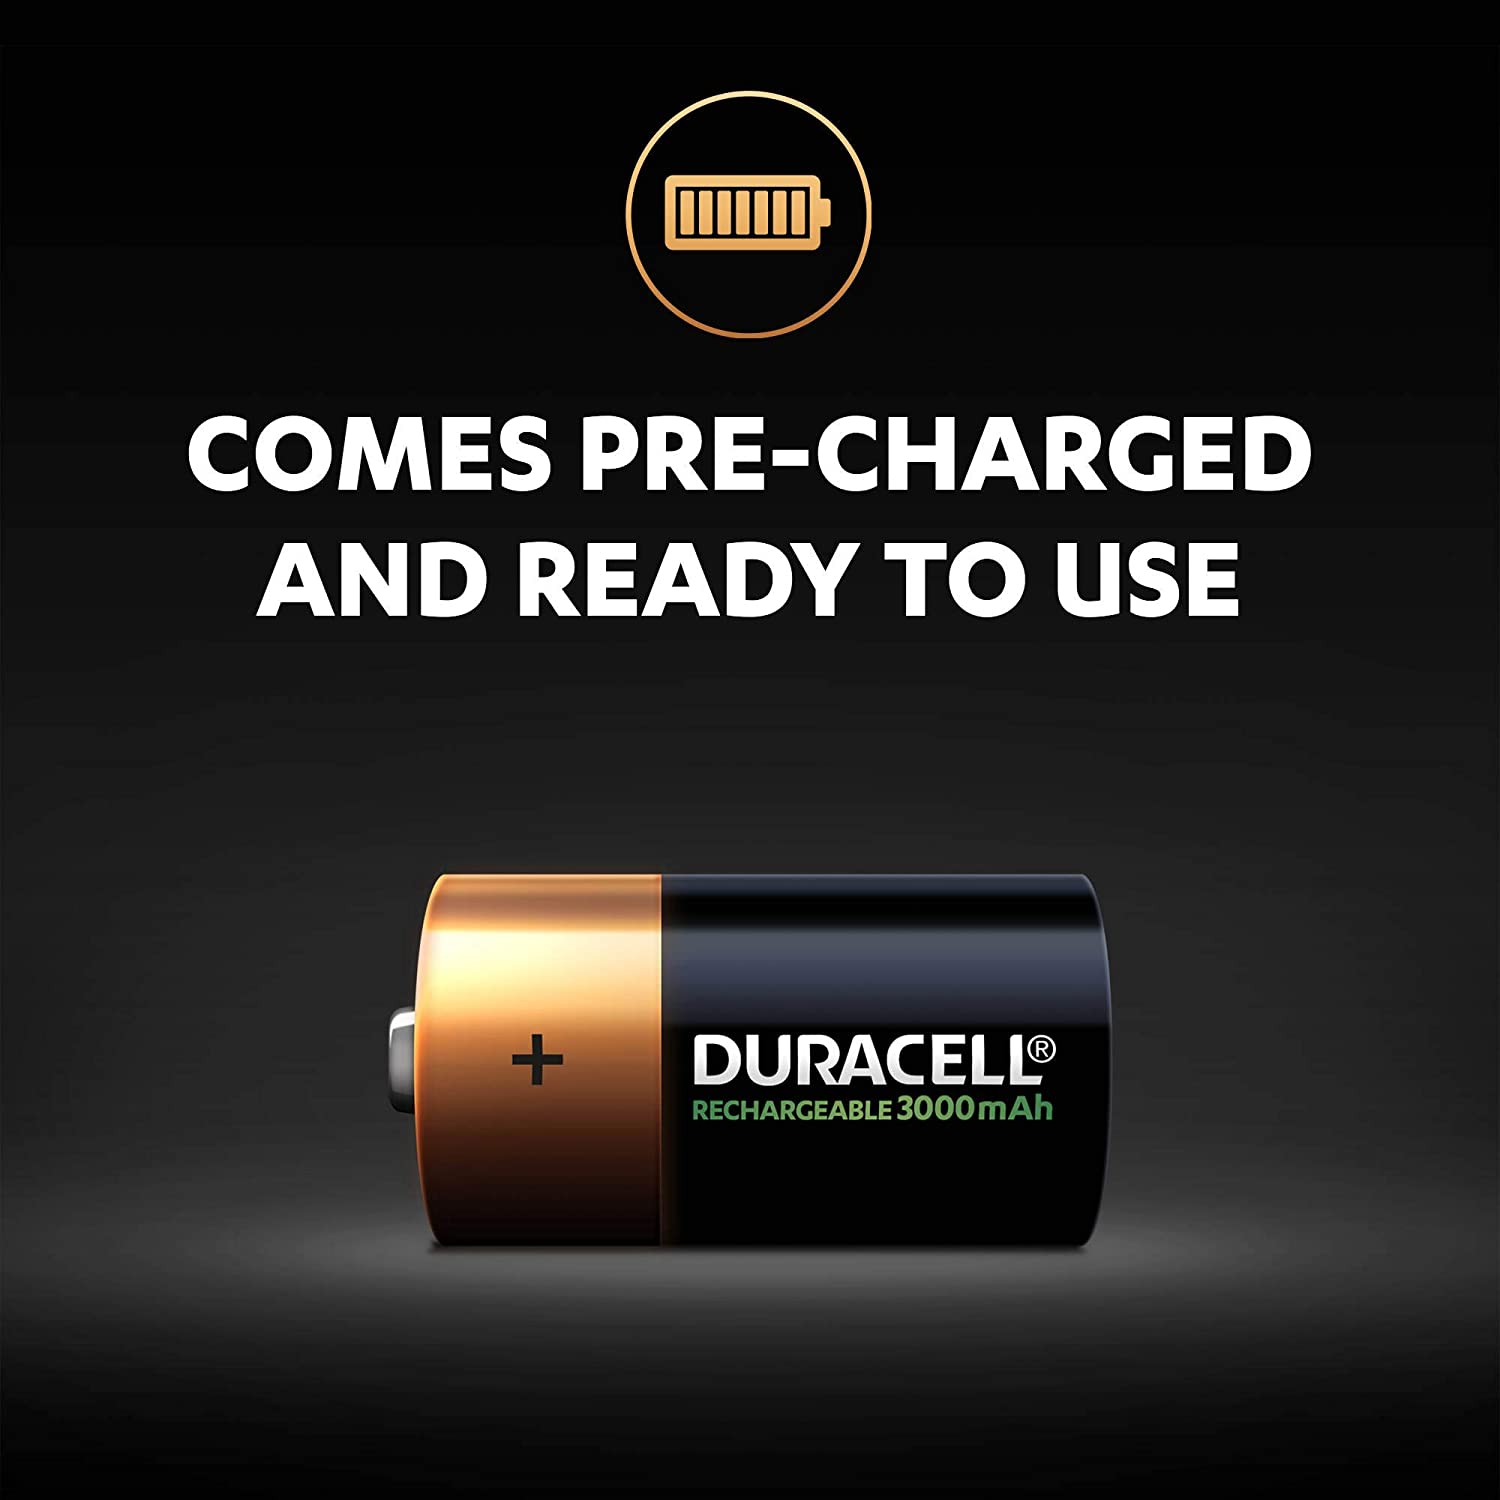 Duracell Rechargeable D 3000 mAh Batteries, pack of 2 - Healthxpress.ie